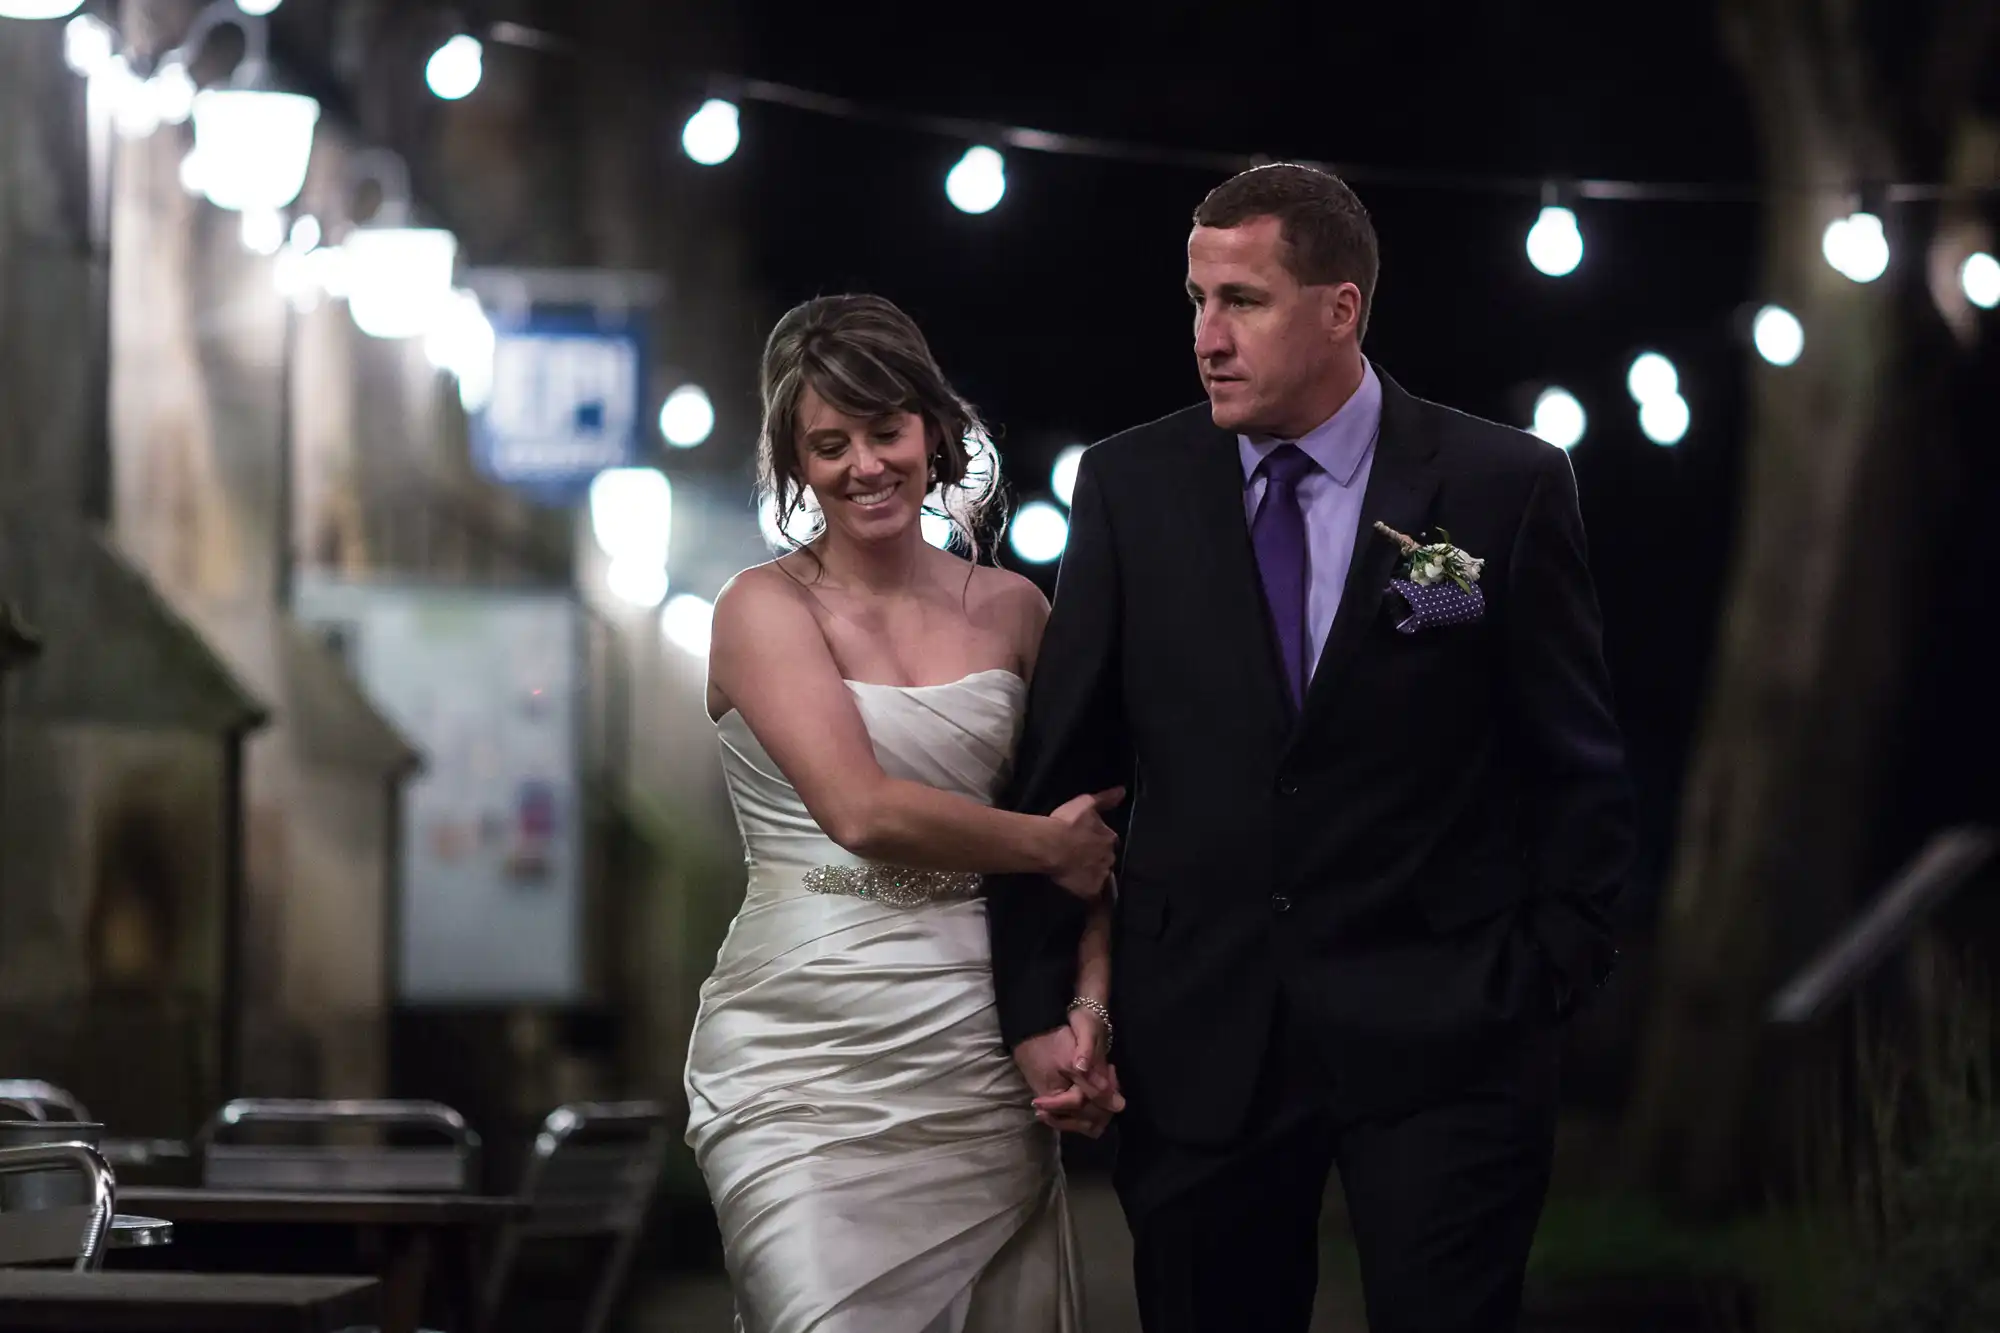 A newlywed couple walking under string lights at night, the bride smiling and linking arms with the groom who wears a purple tie.